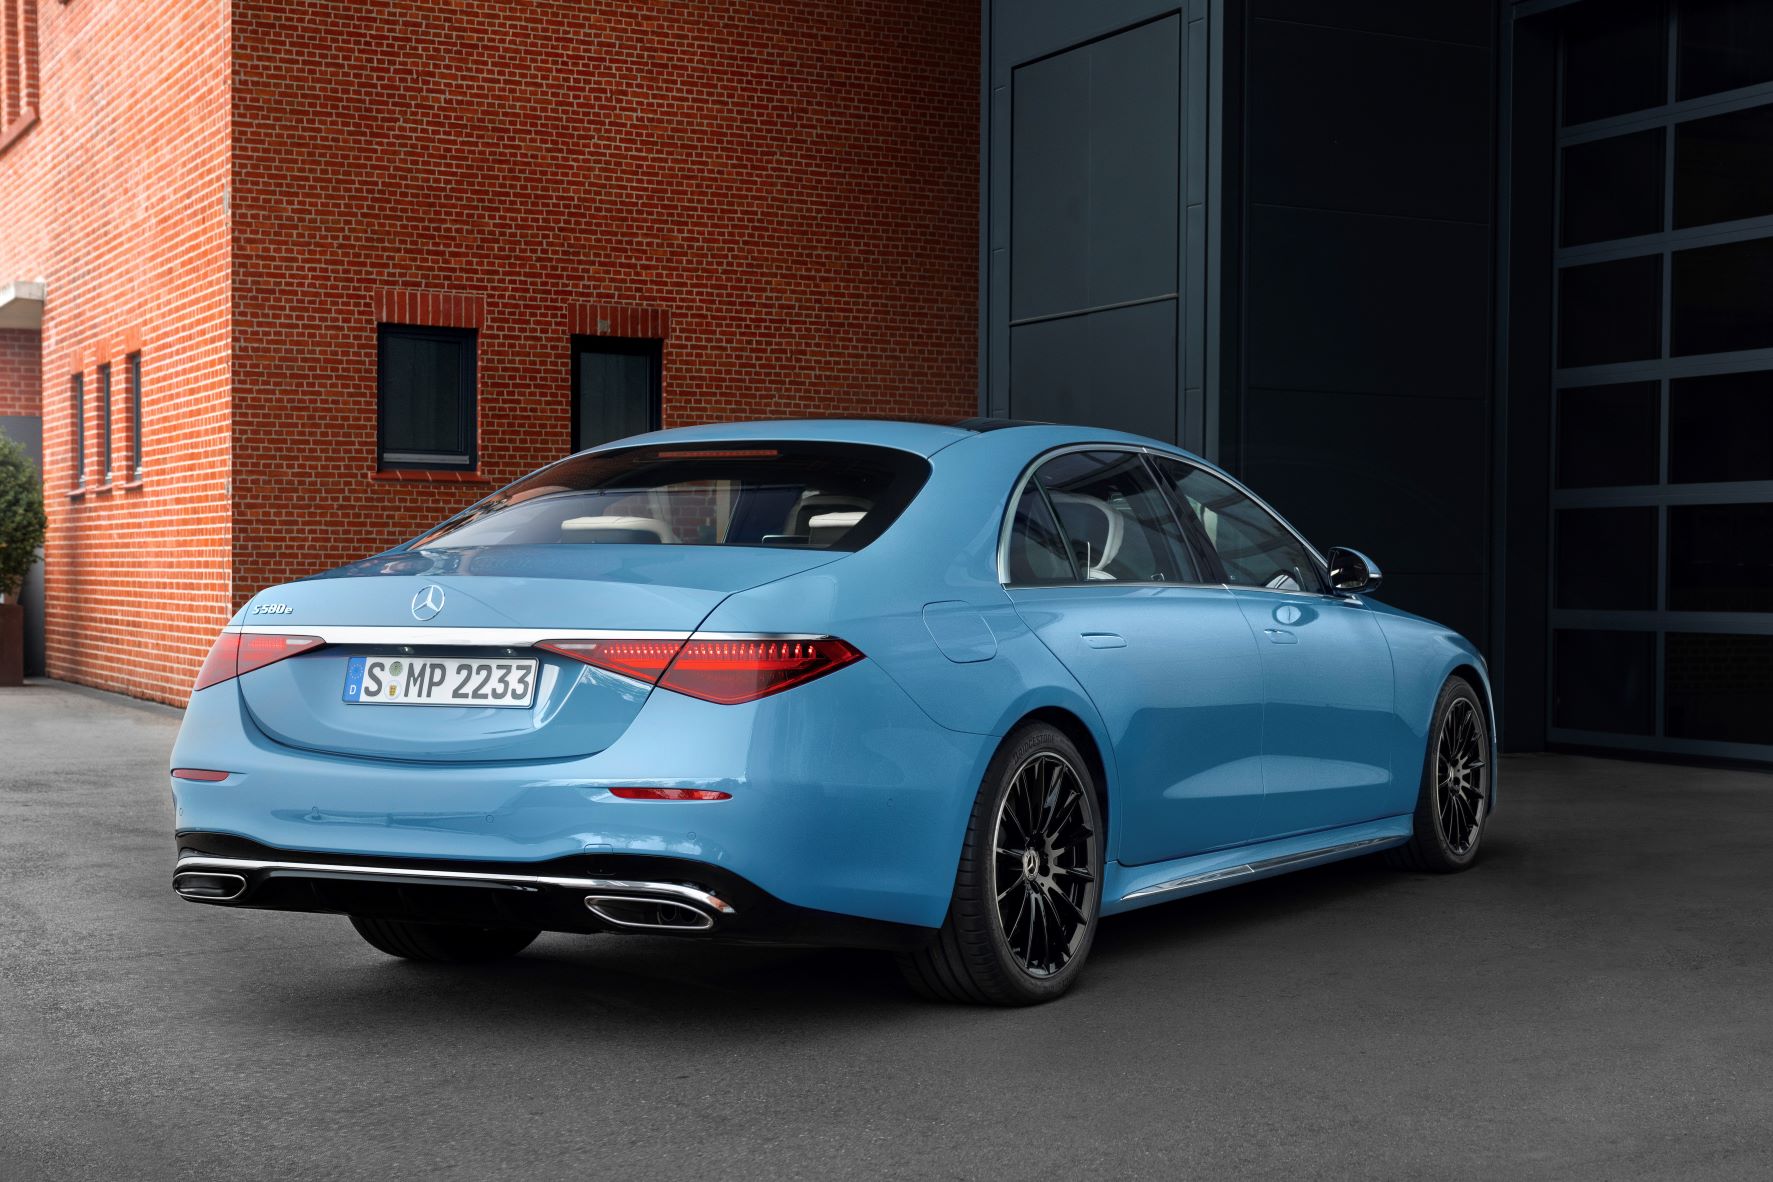 Rear three quarters view of the new Mercedes-Benz S-Class in blue